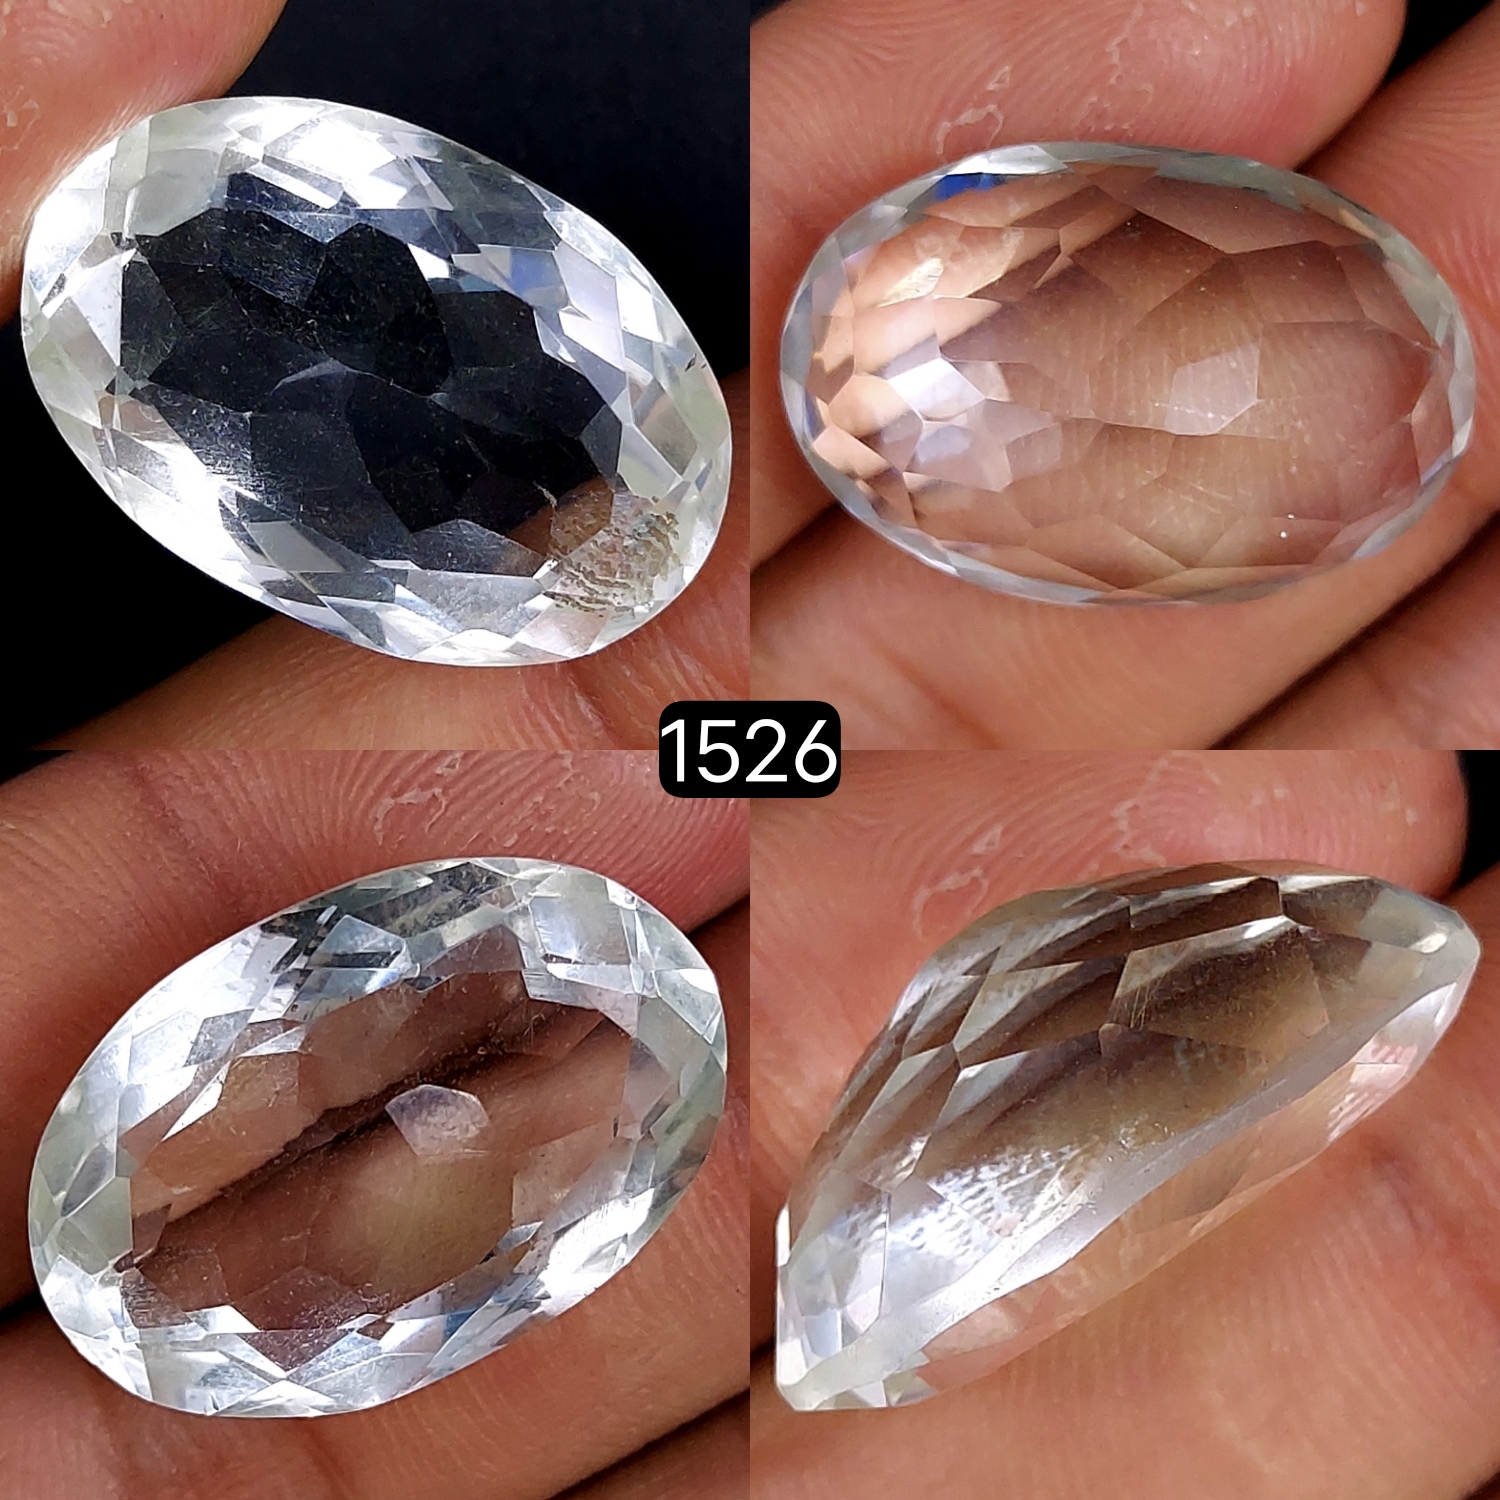 1Pc 34Cts Natural Crystal Quartz Faceted Cabochon Gemstone Oval Shape Crystal 26x18mm#1526